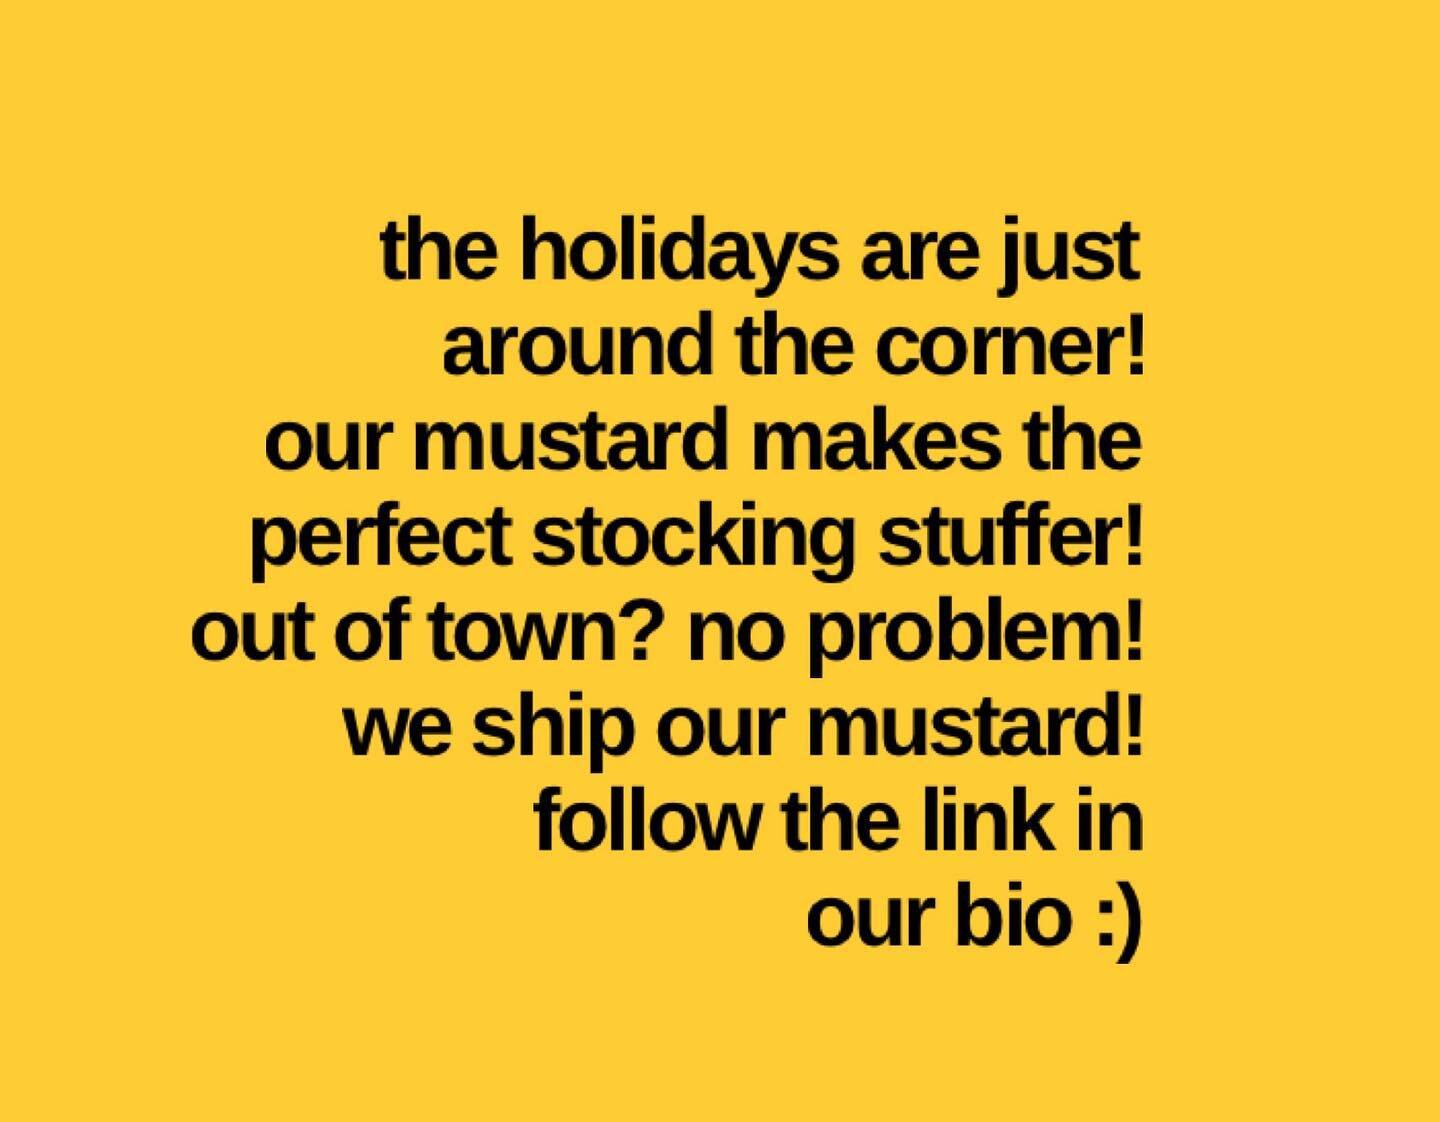 our mustard jars fit beautifully in any stocking&hellip; we&rsquo;ve been told santa&rsquo;s reindeers like to dip carrots in it too! support local this holiday season💛